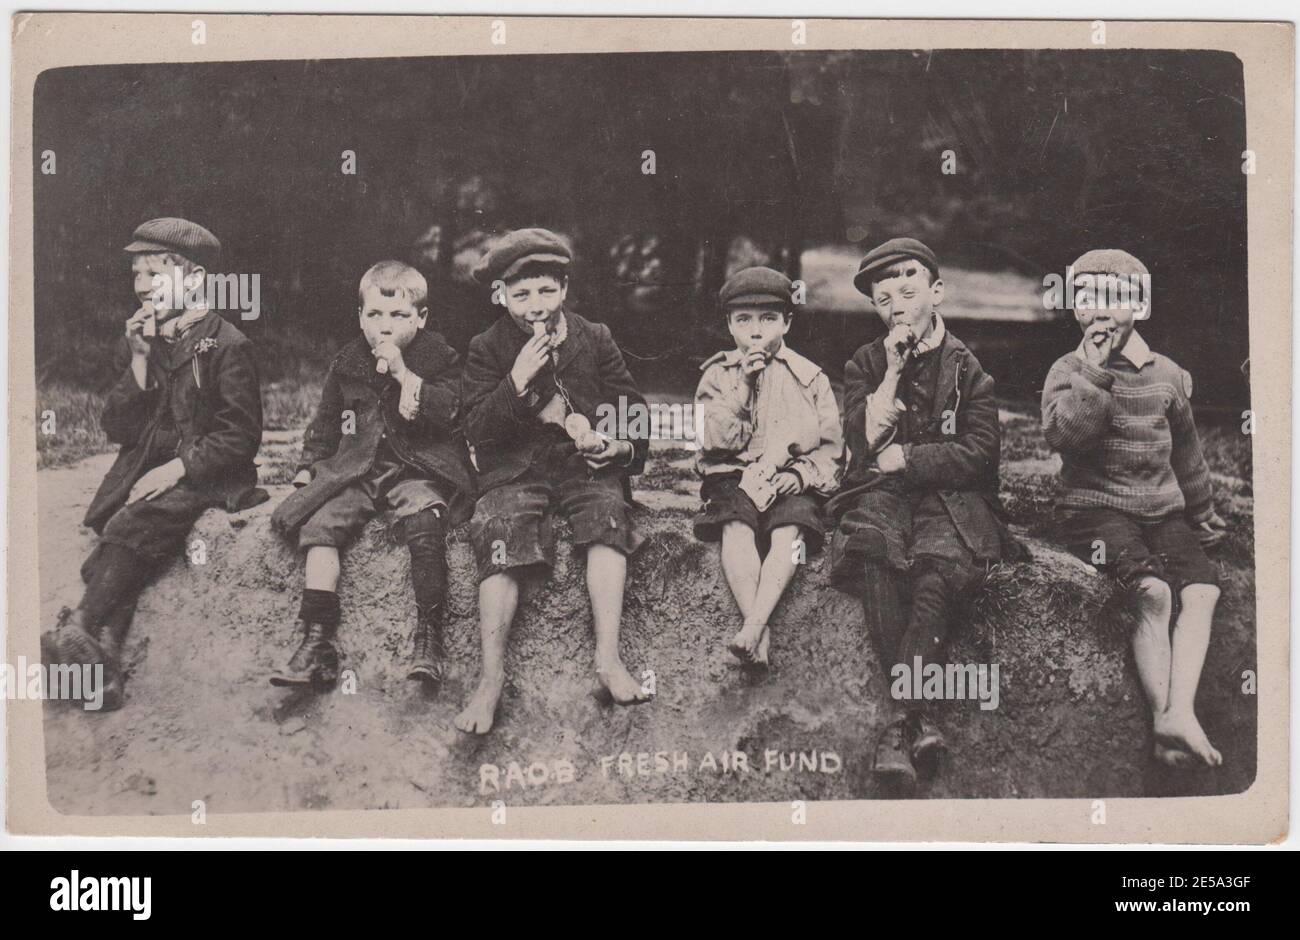 Royal Antidiluvian Order of Buffaloes (RAOB) Fresh Air Fund: inner city children enjoying sweets on a trip to the countryside, early 20th century Britain Stock Photo